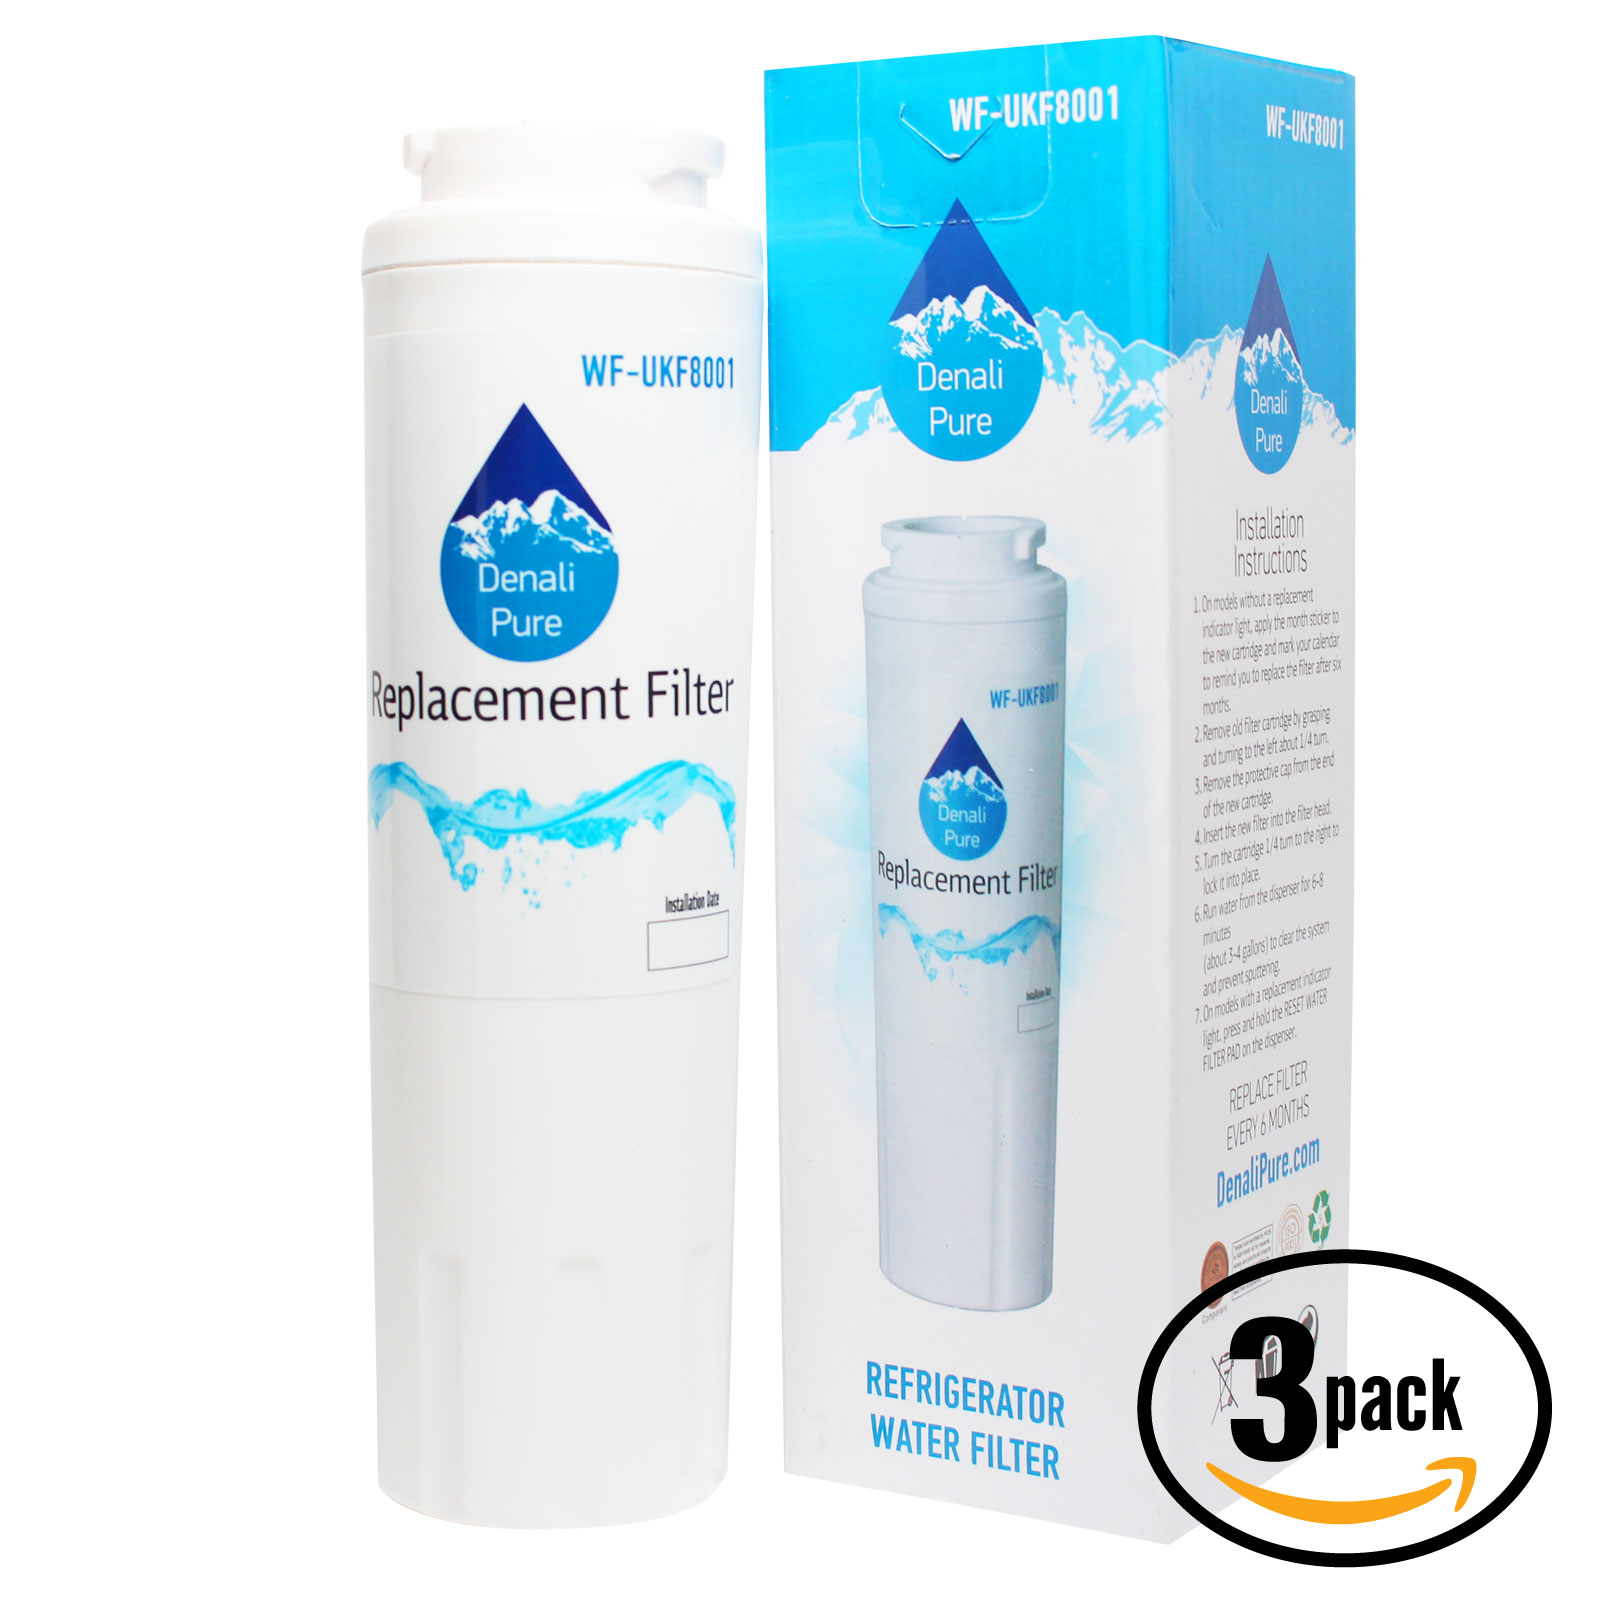 3-Pack Replacement for Kenmore / Sears 59676602600 Refrigerator Water Filter - Compatible with Kenmore / Sears 46-9006, 46-9992 Fridge Water Filter Cartridge - image 1 of 4